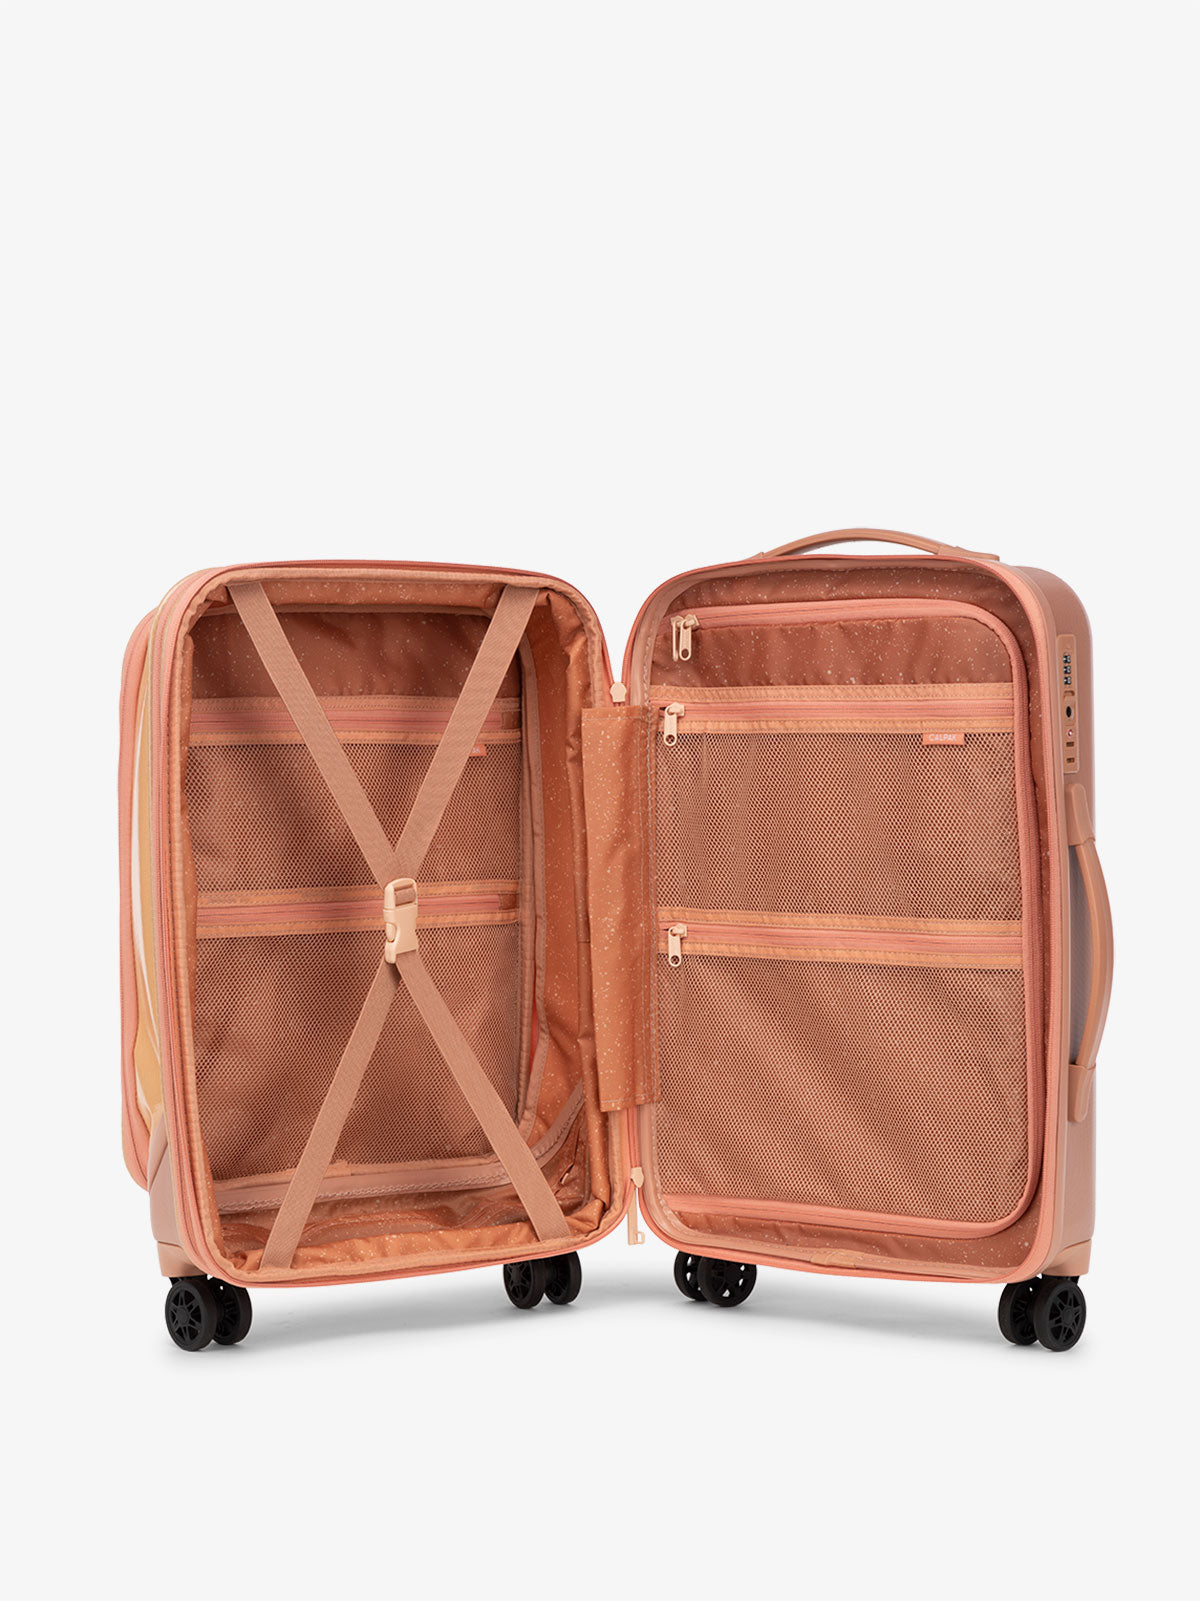 CALPAK Terra Carry-On suitcase interior with multiple pockets and compression strap in canyon